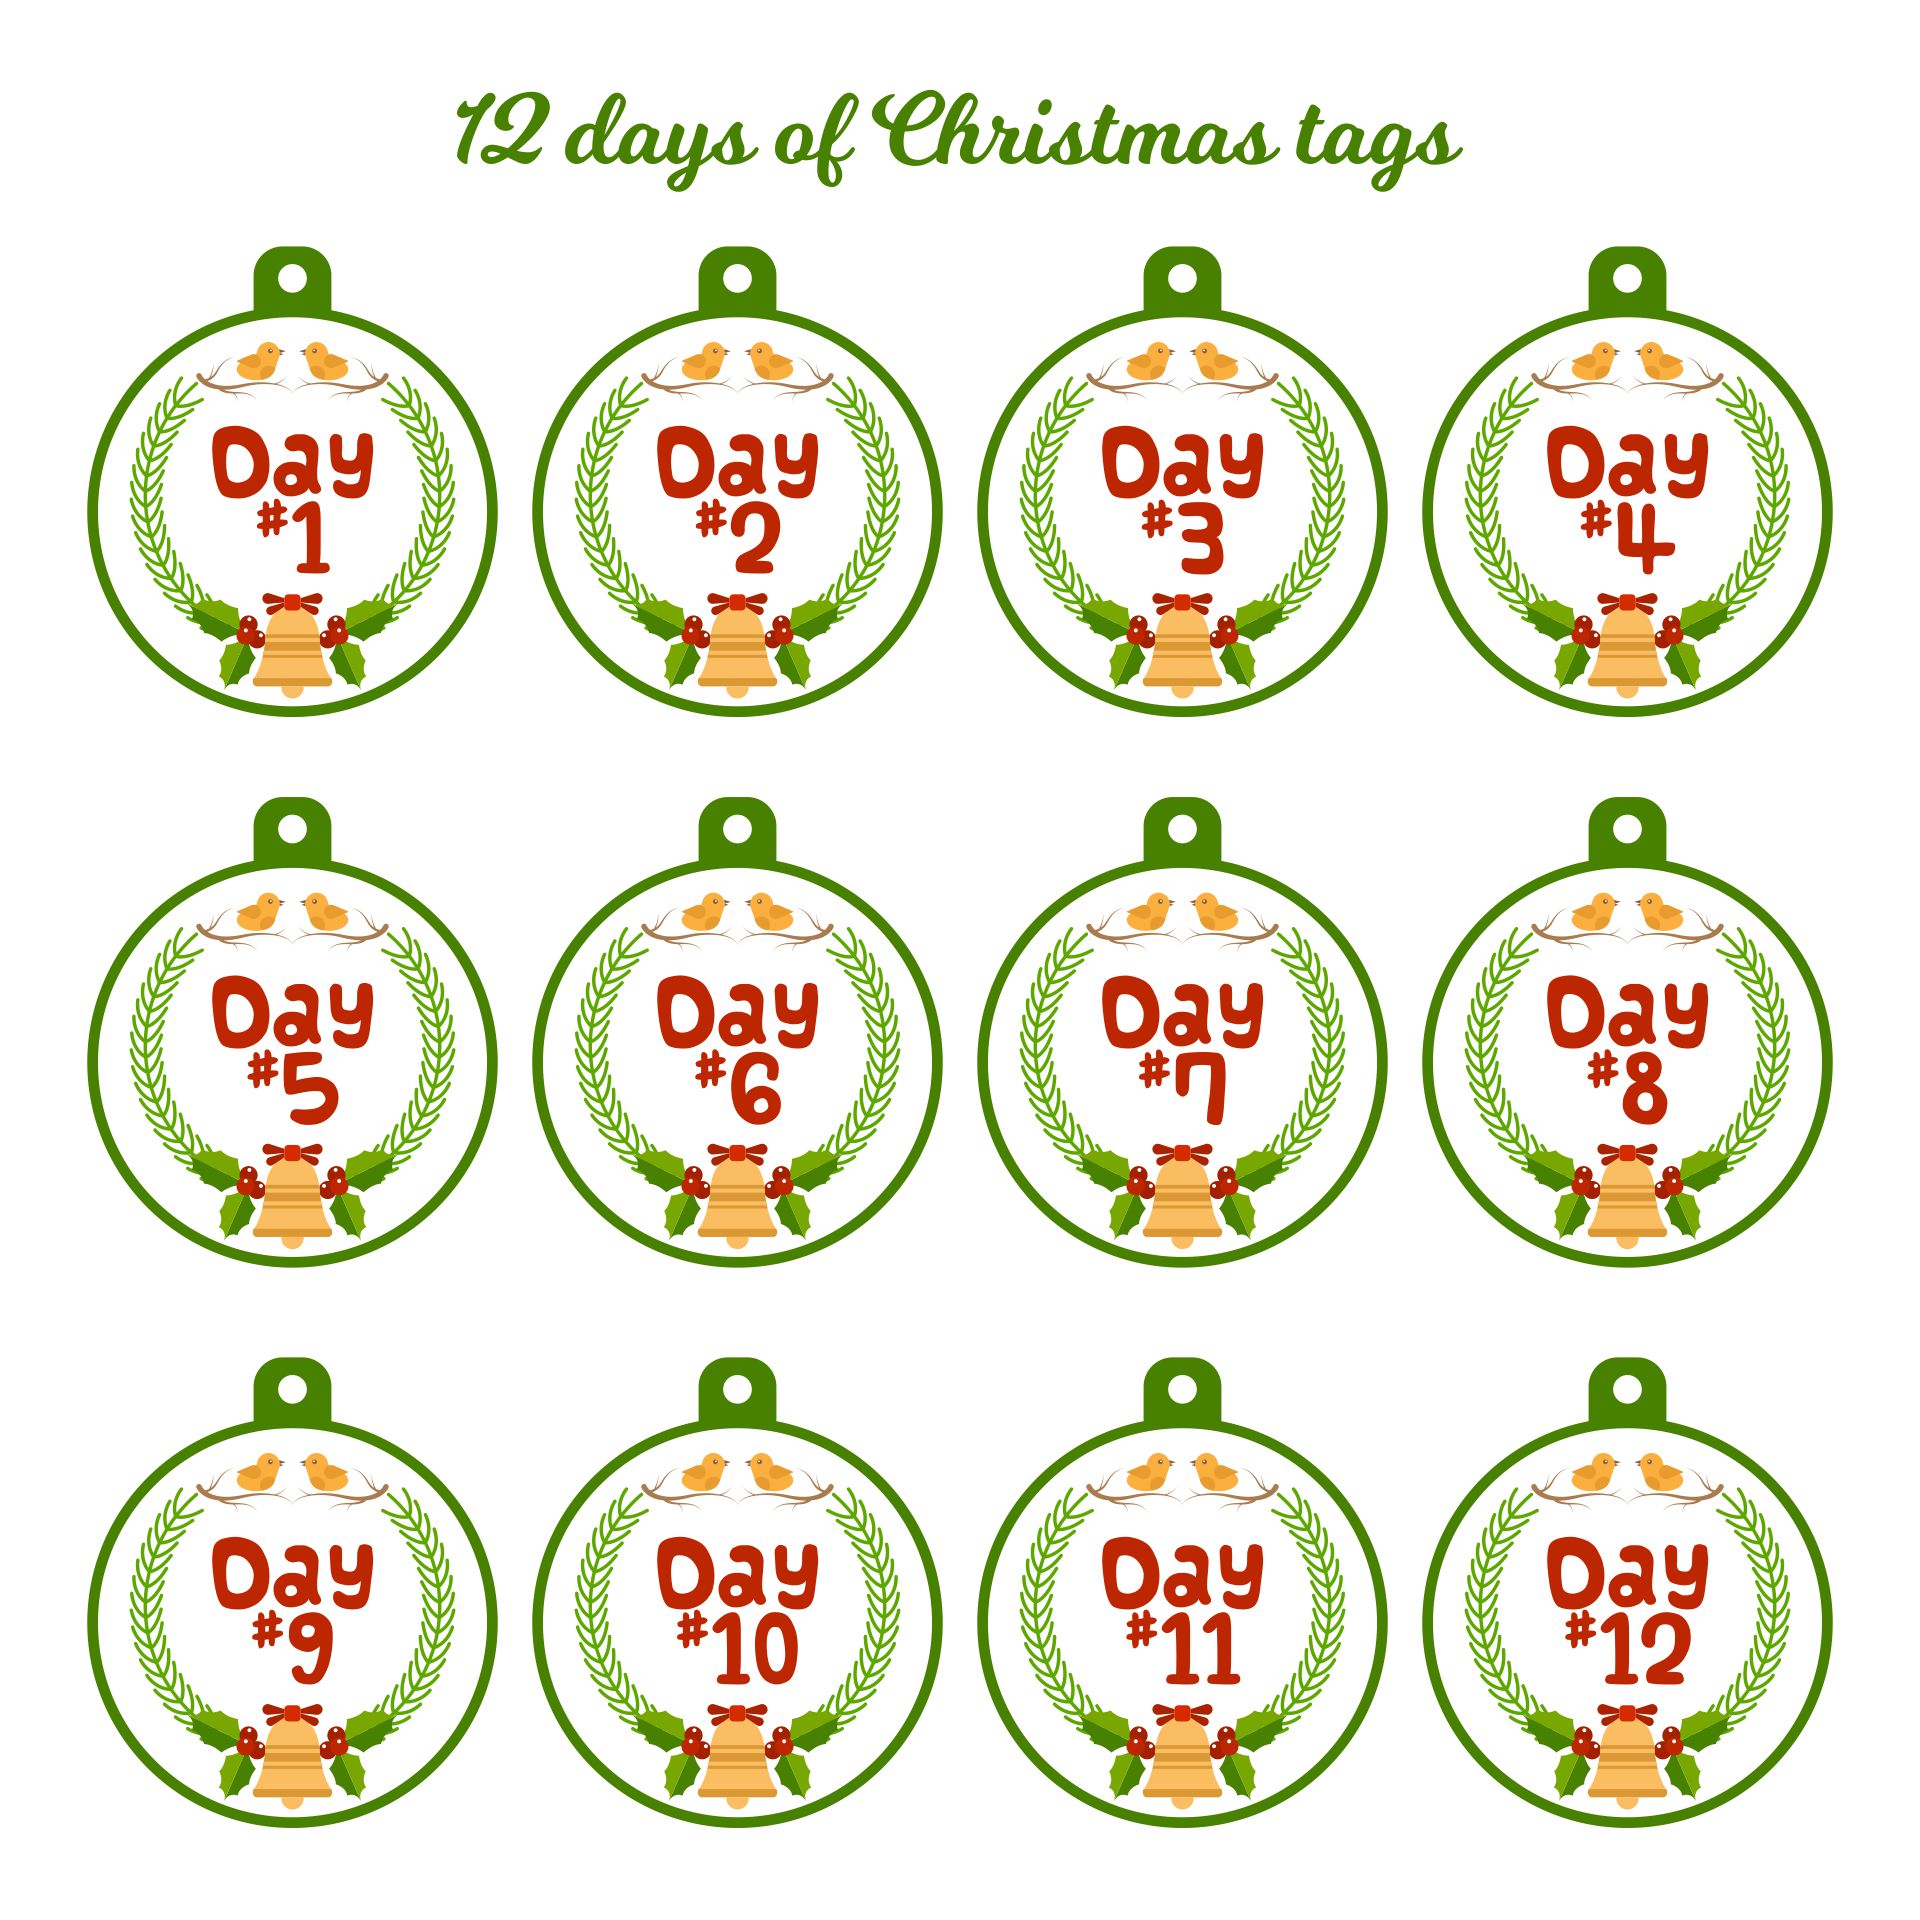 creative-12-days-of-christmas-gifts-free-gift-tags-play-party-plan